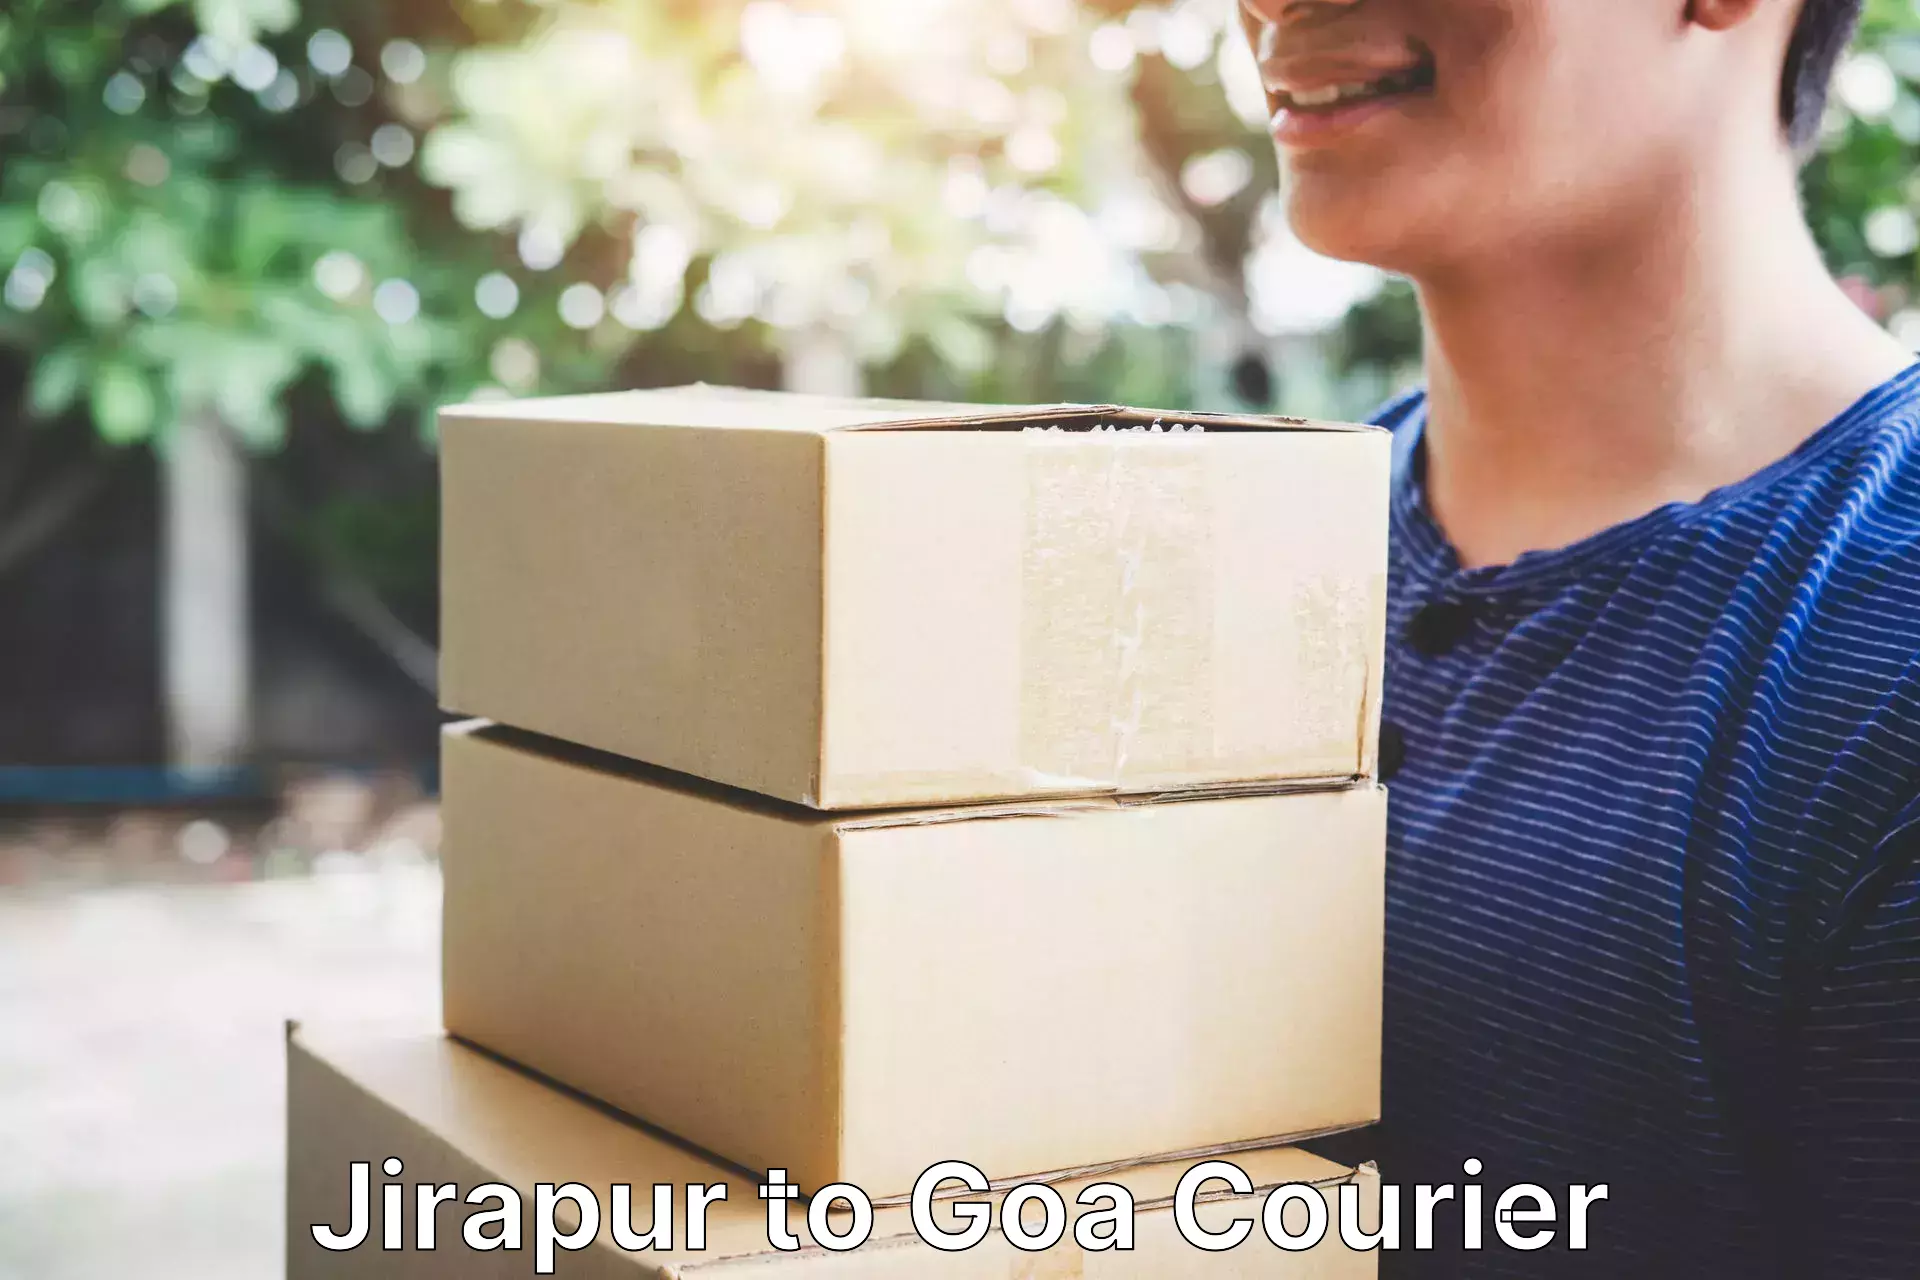 Smart parcel tracking in Jirapur to Goa